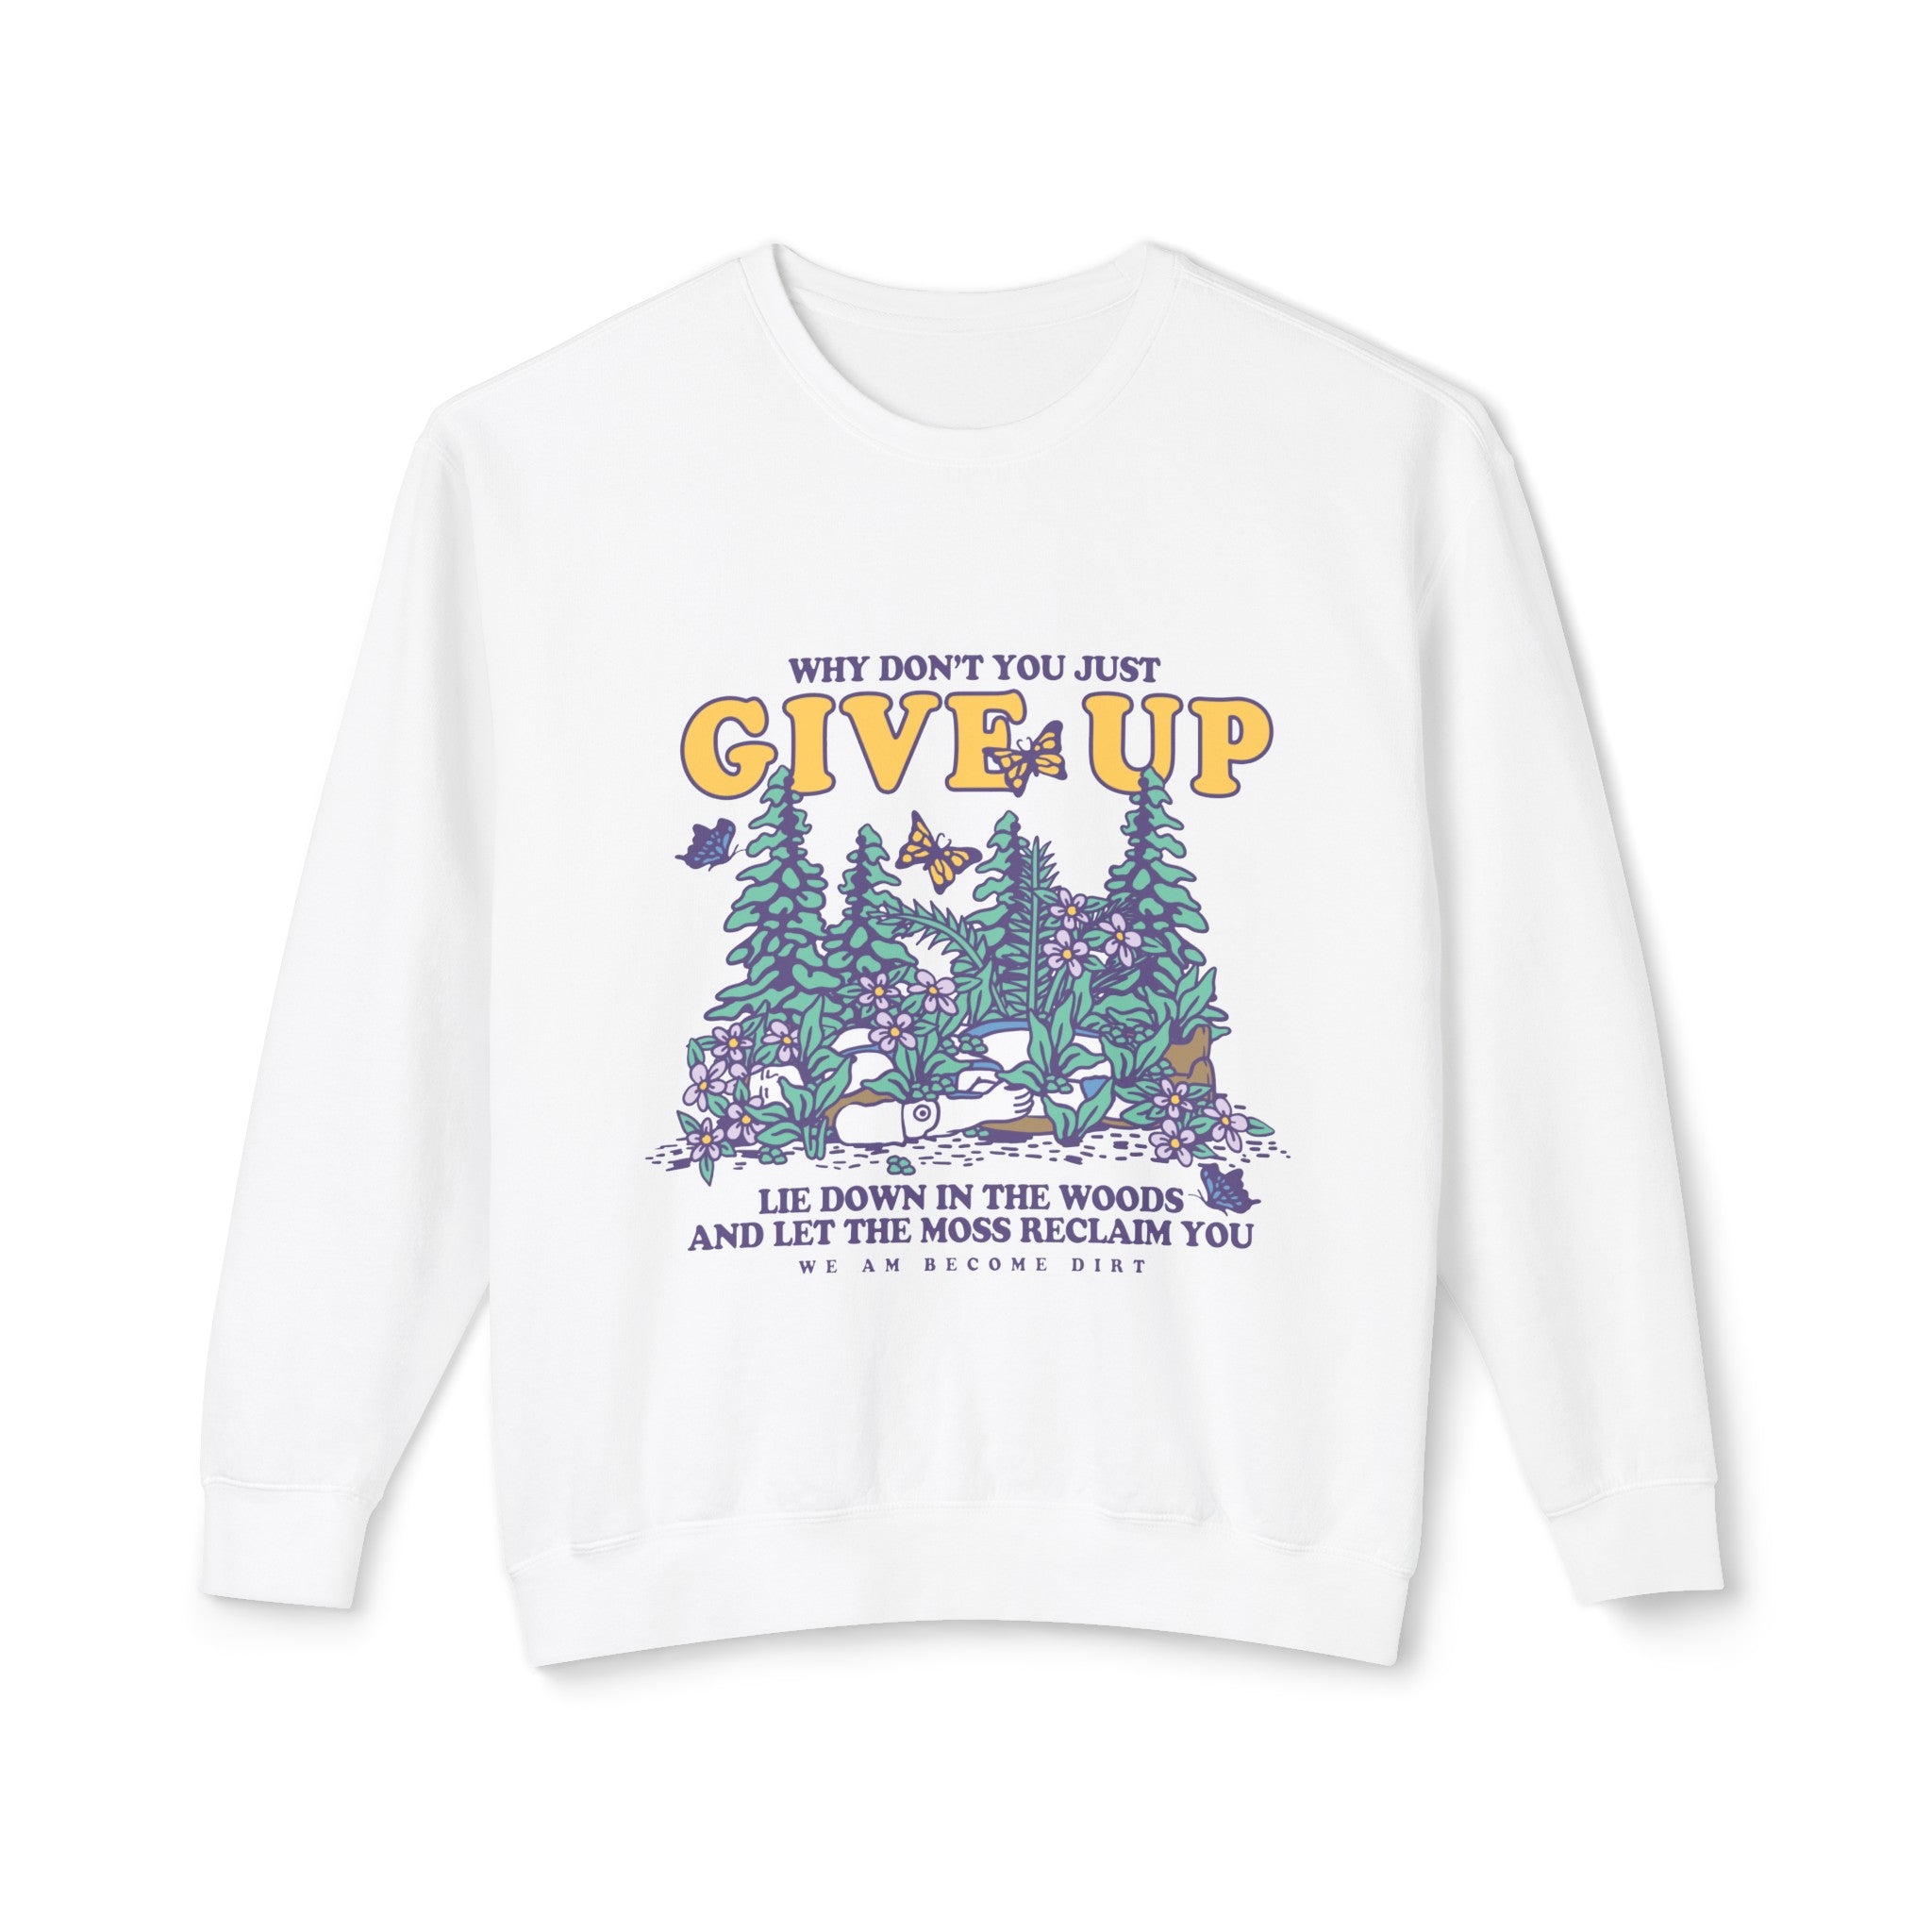 "Why Don't You Just Give Up" Sweatshirt